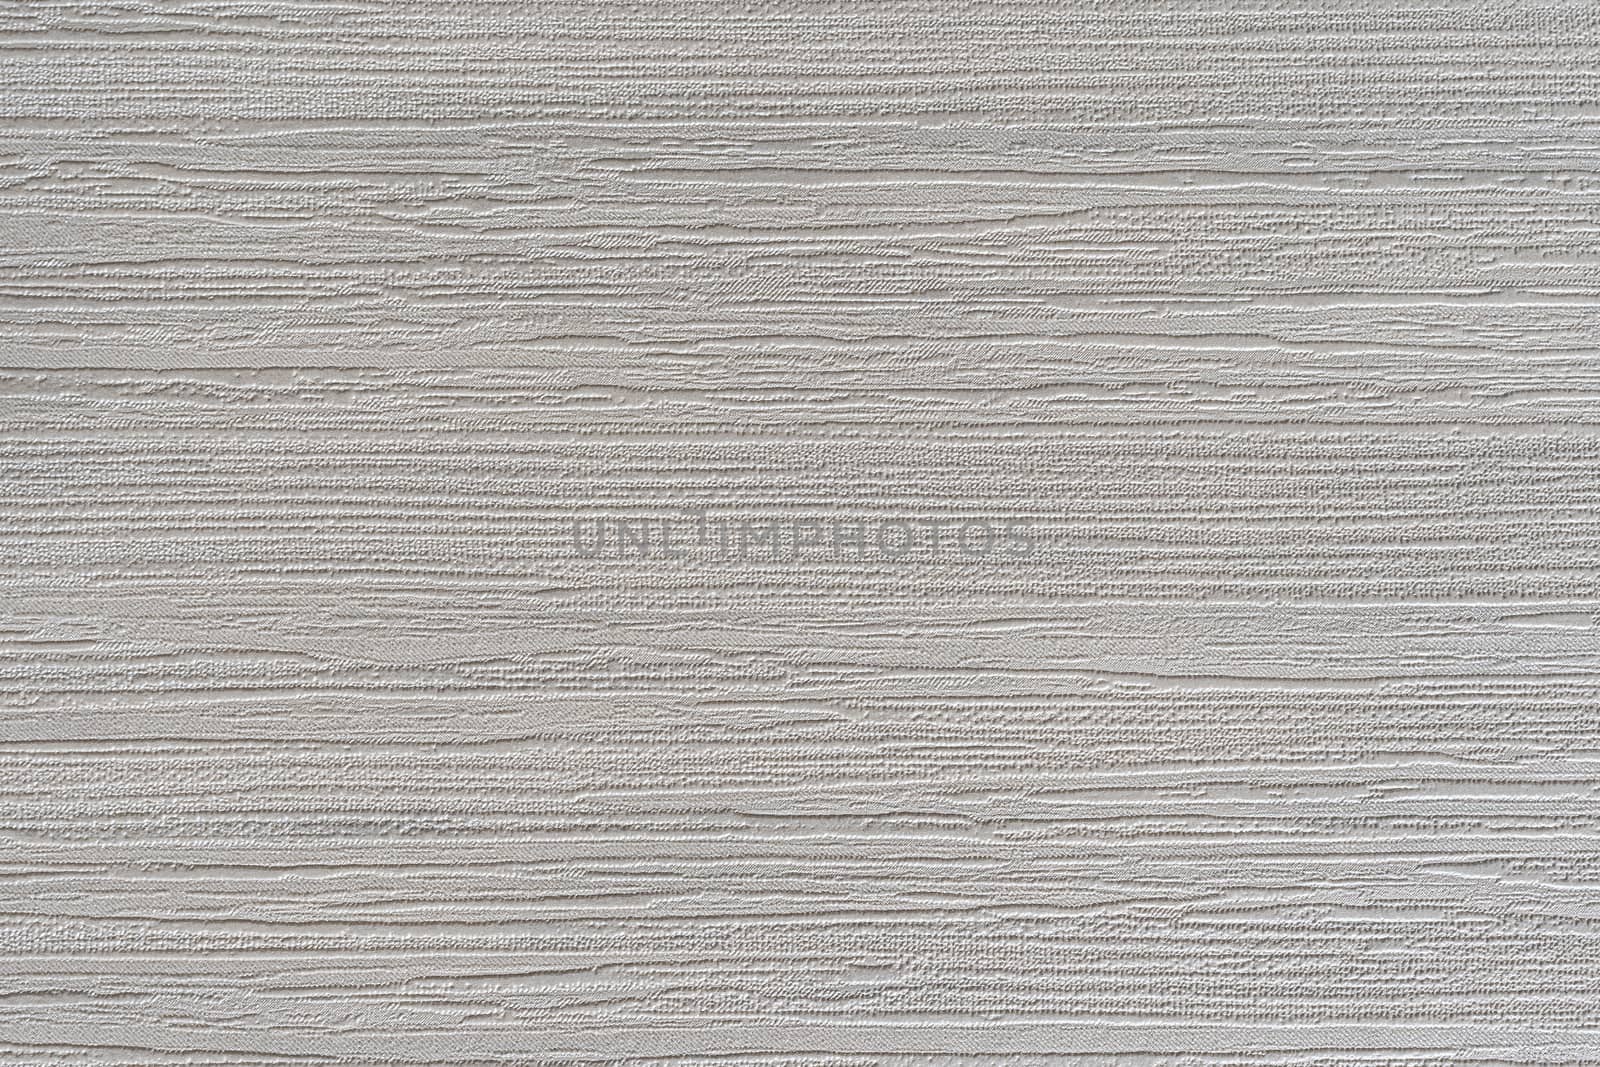 Texture of gray wood background.